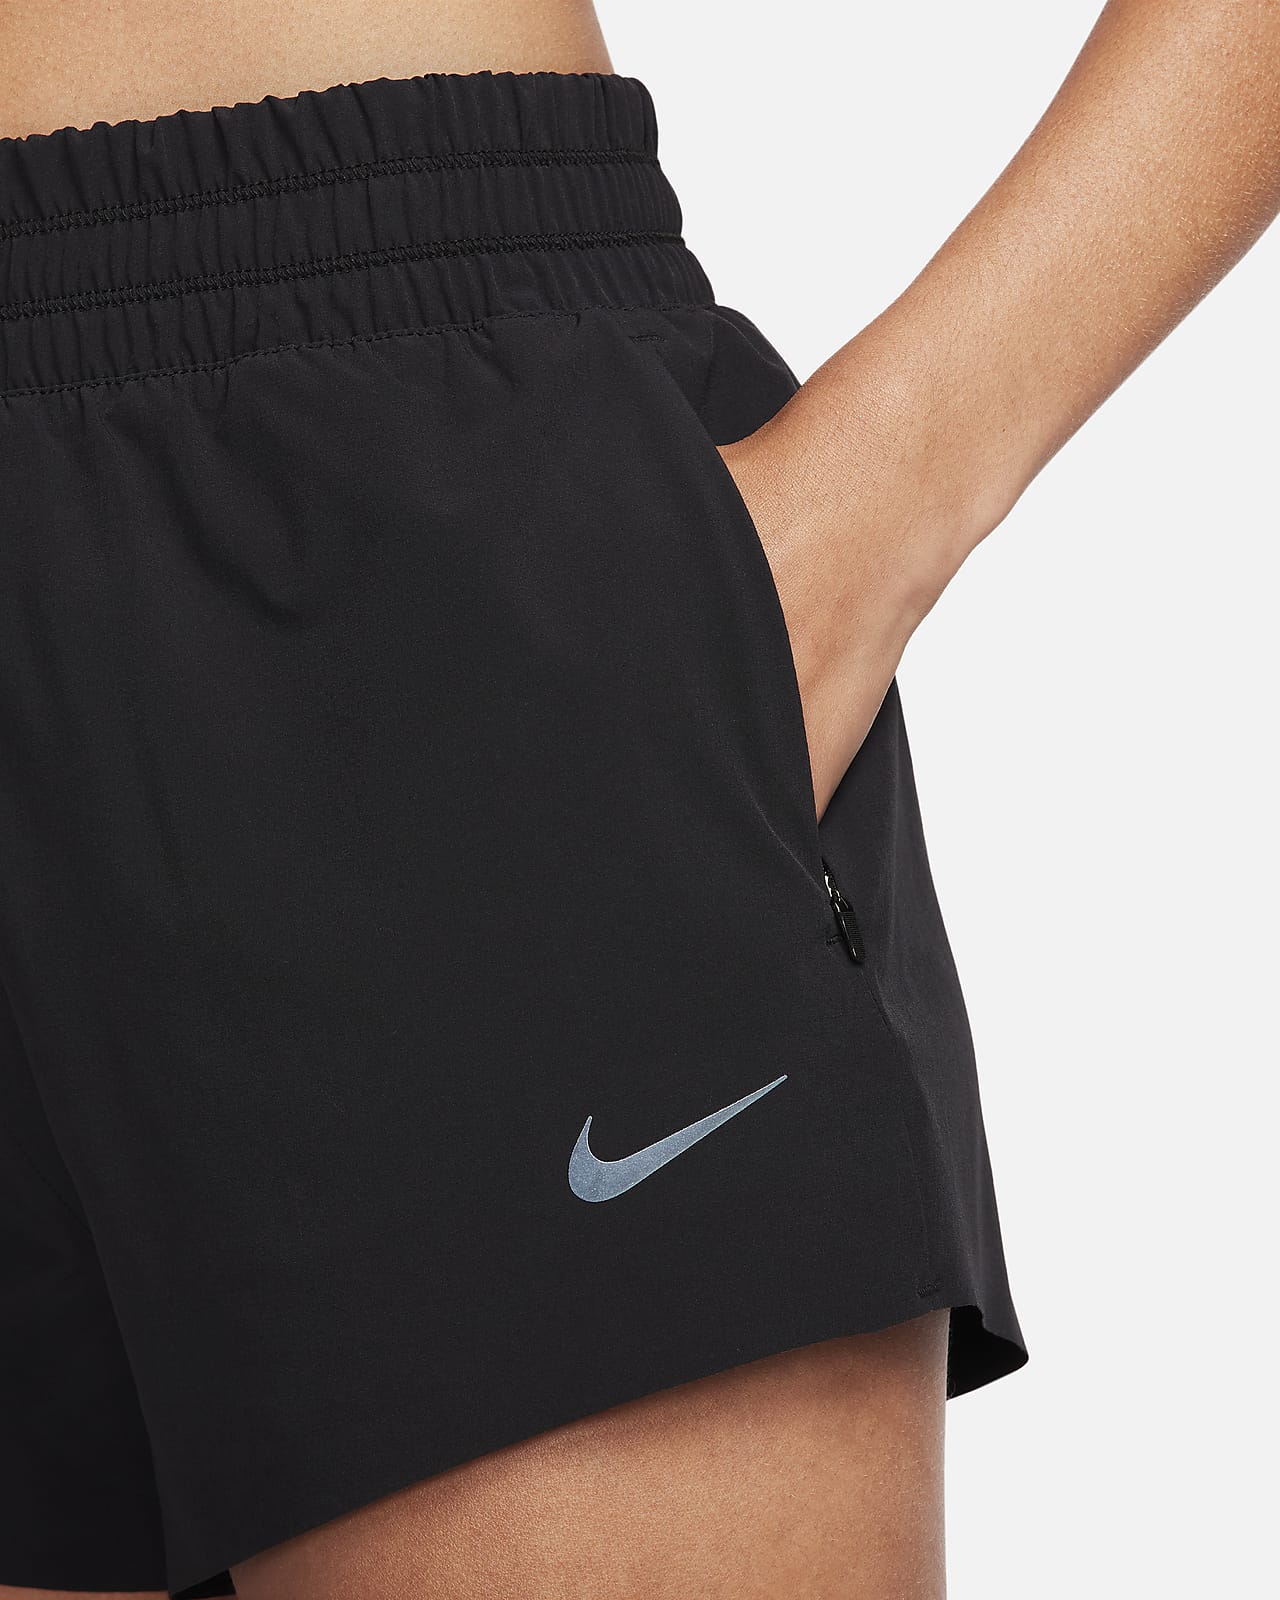 Women’s Nike Dri Fit Black Running Shorts With Built In Underwear Size  Small New